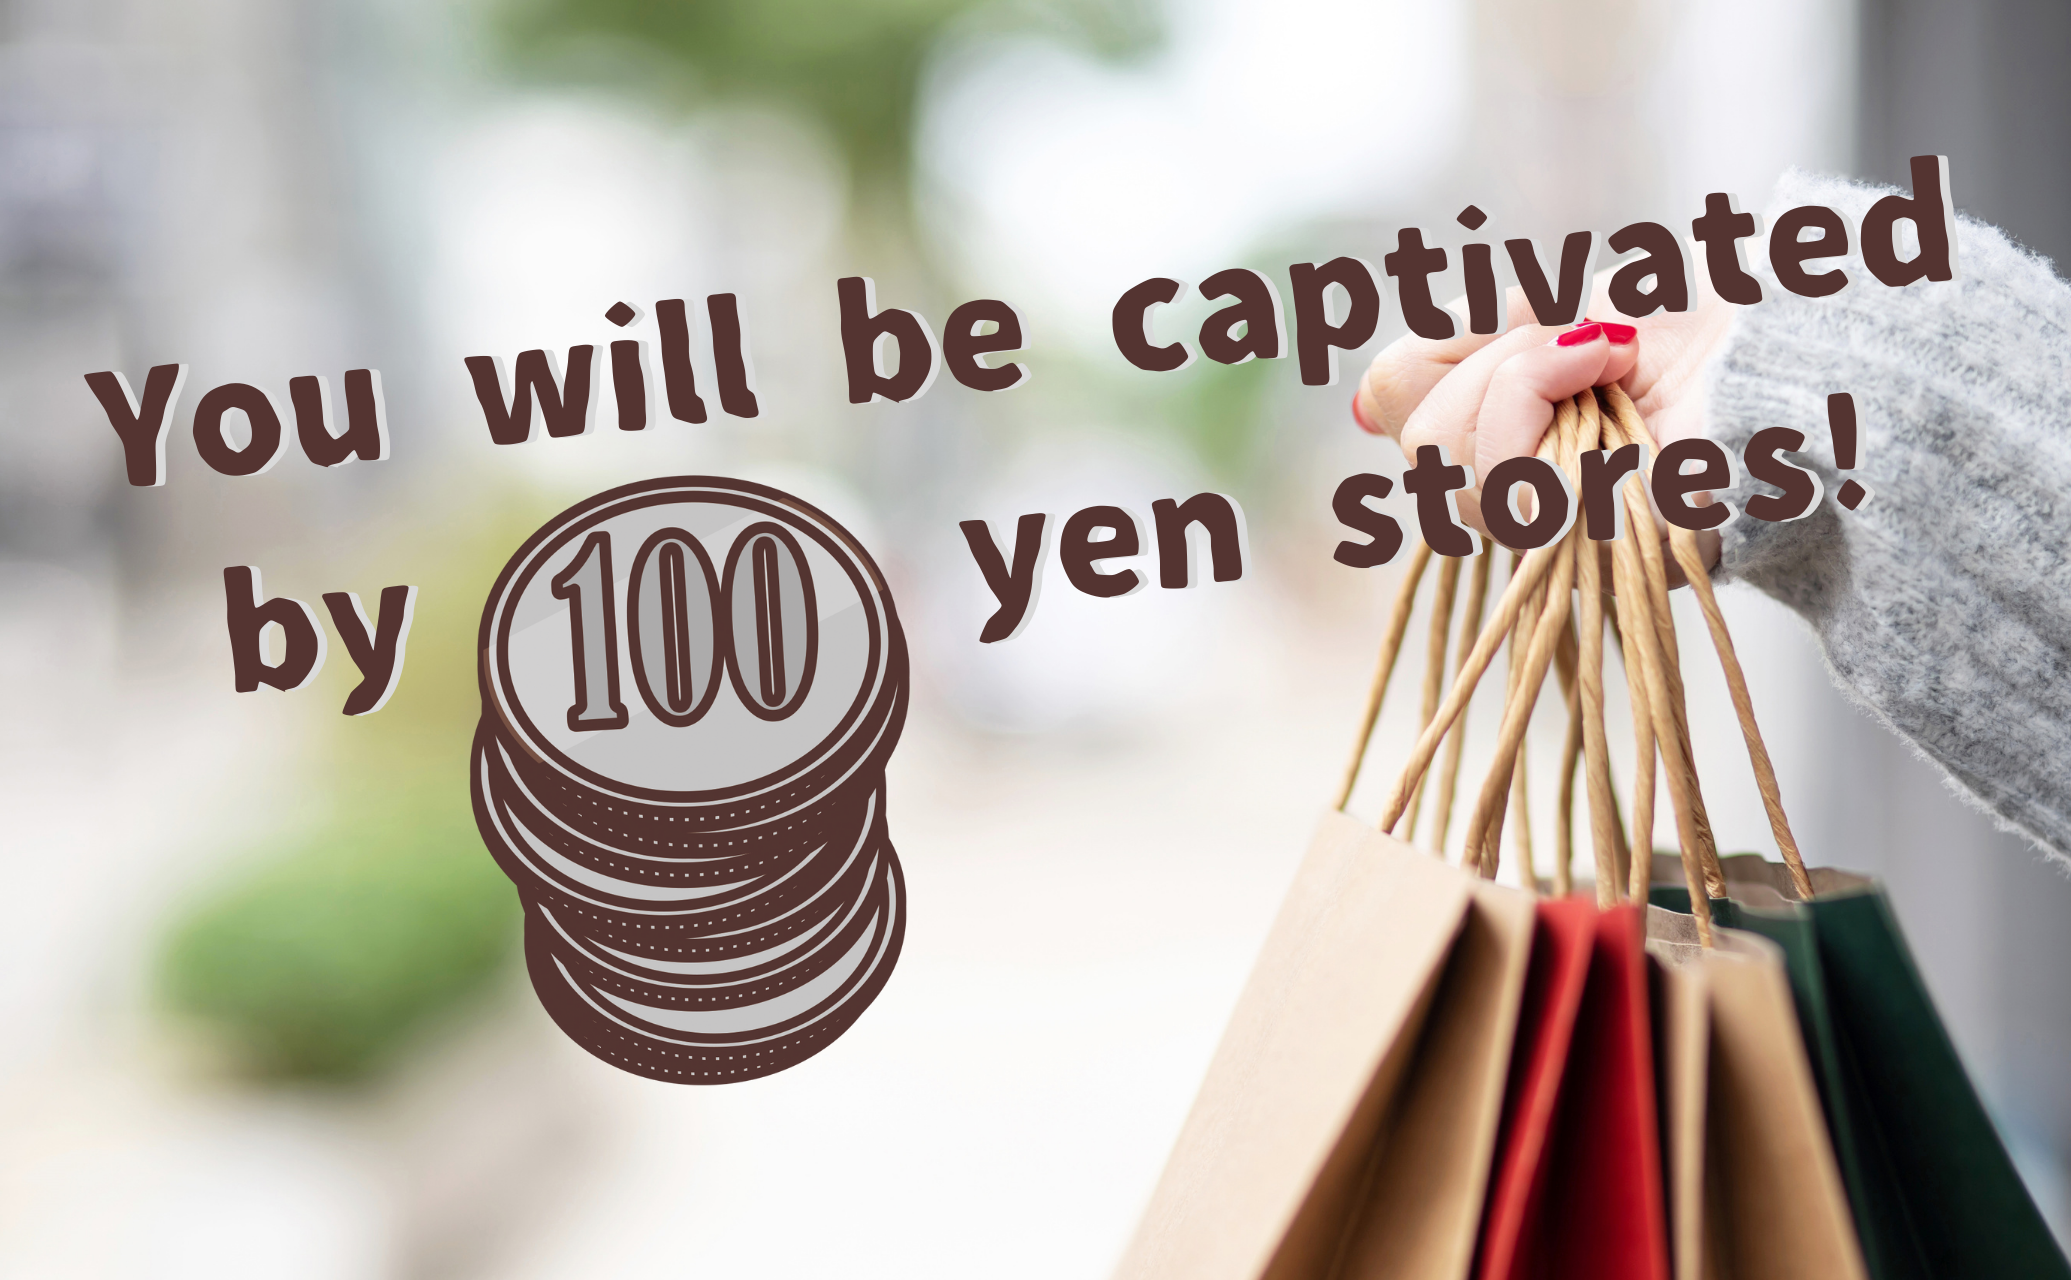 you will be captivated by 100 yen stores